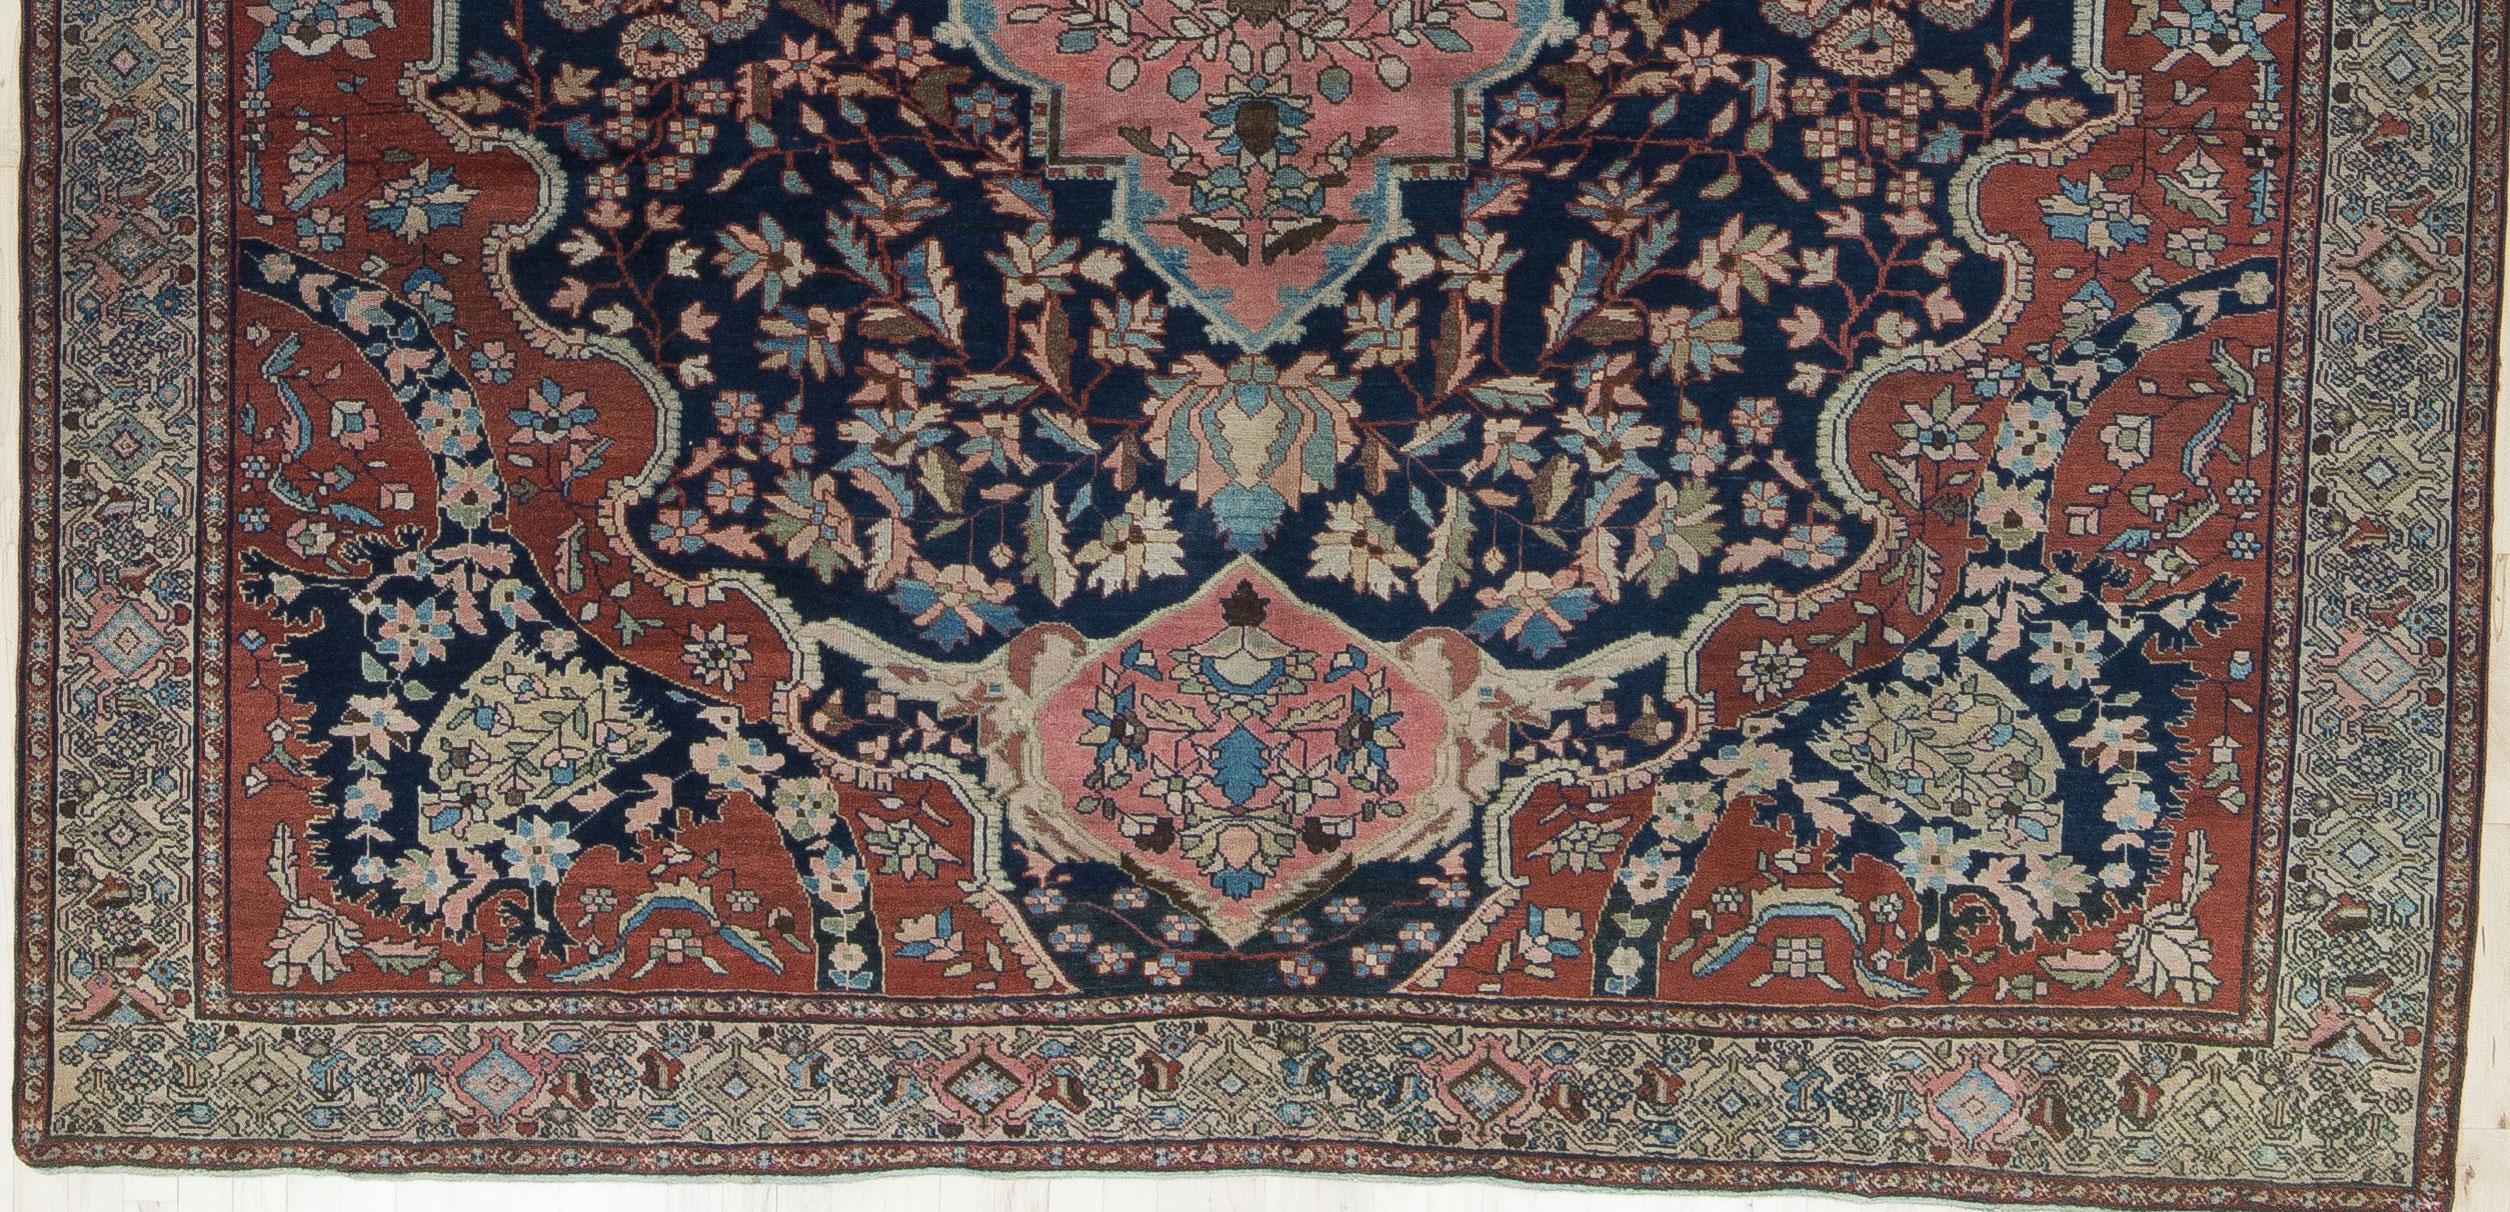 An early 19th Century Sarouk with deep navy, cornflower blue, jade green, shades of pink and ivory. A very finely woven rug with a low wool pile and delicate floral design. A classic, timeless piece. In beautiful condition with preserved sides and